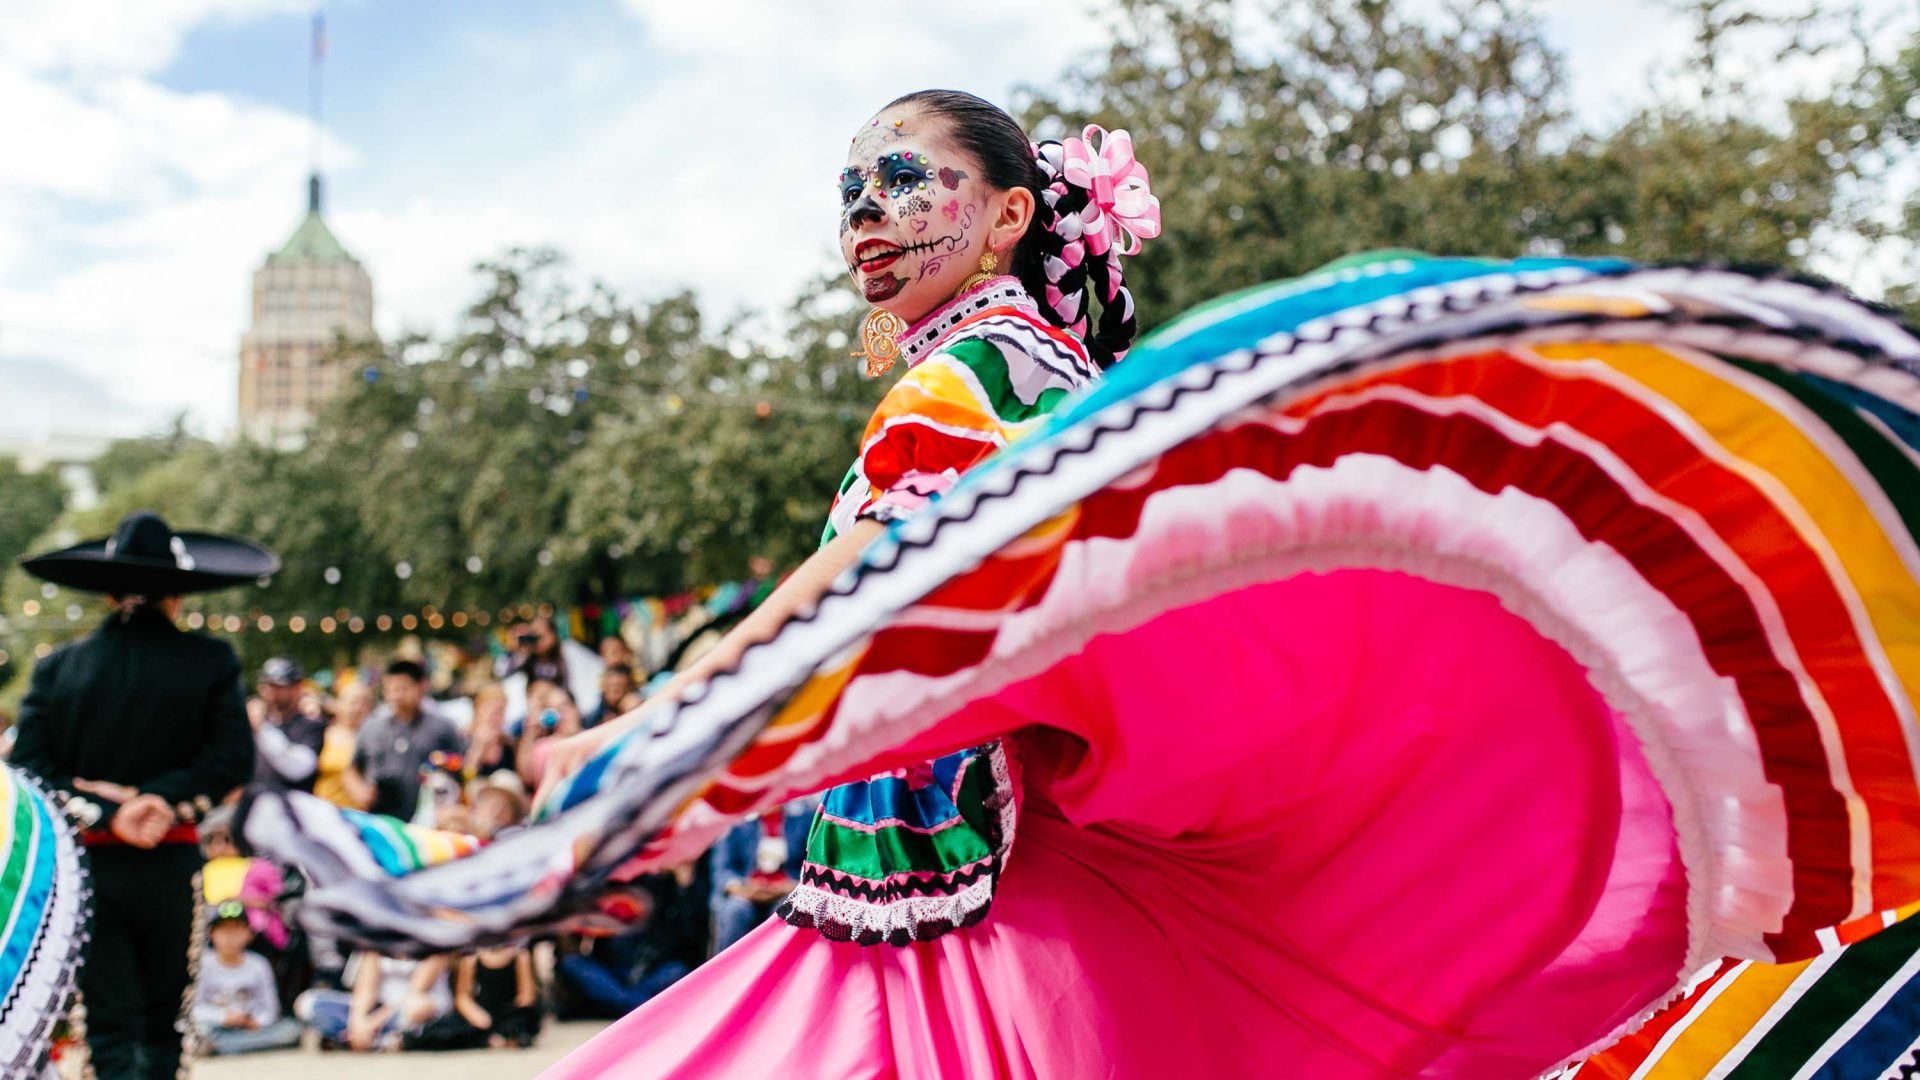 A dancer in face paint wearing a big pink skirt.